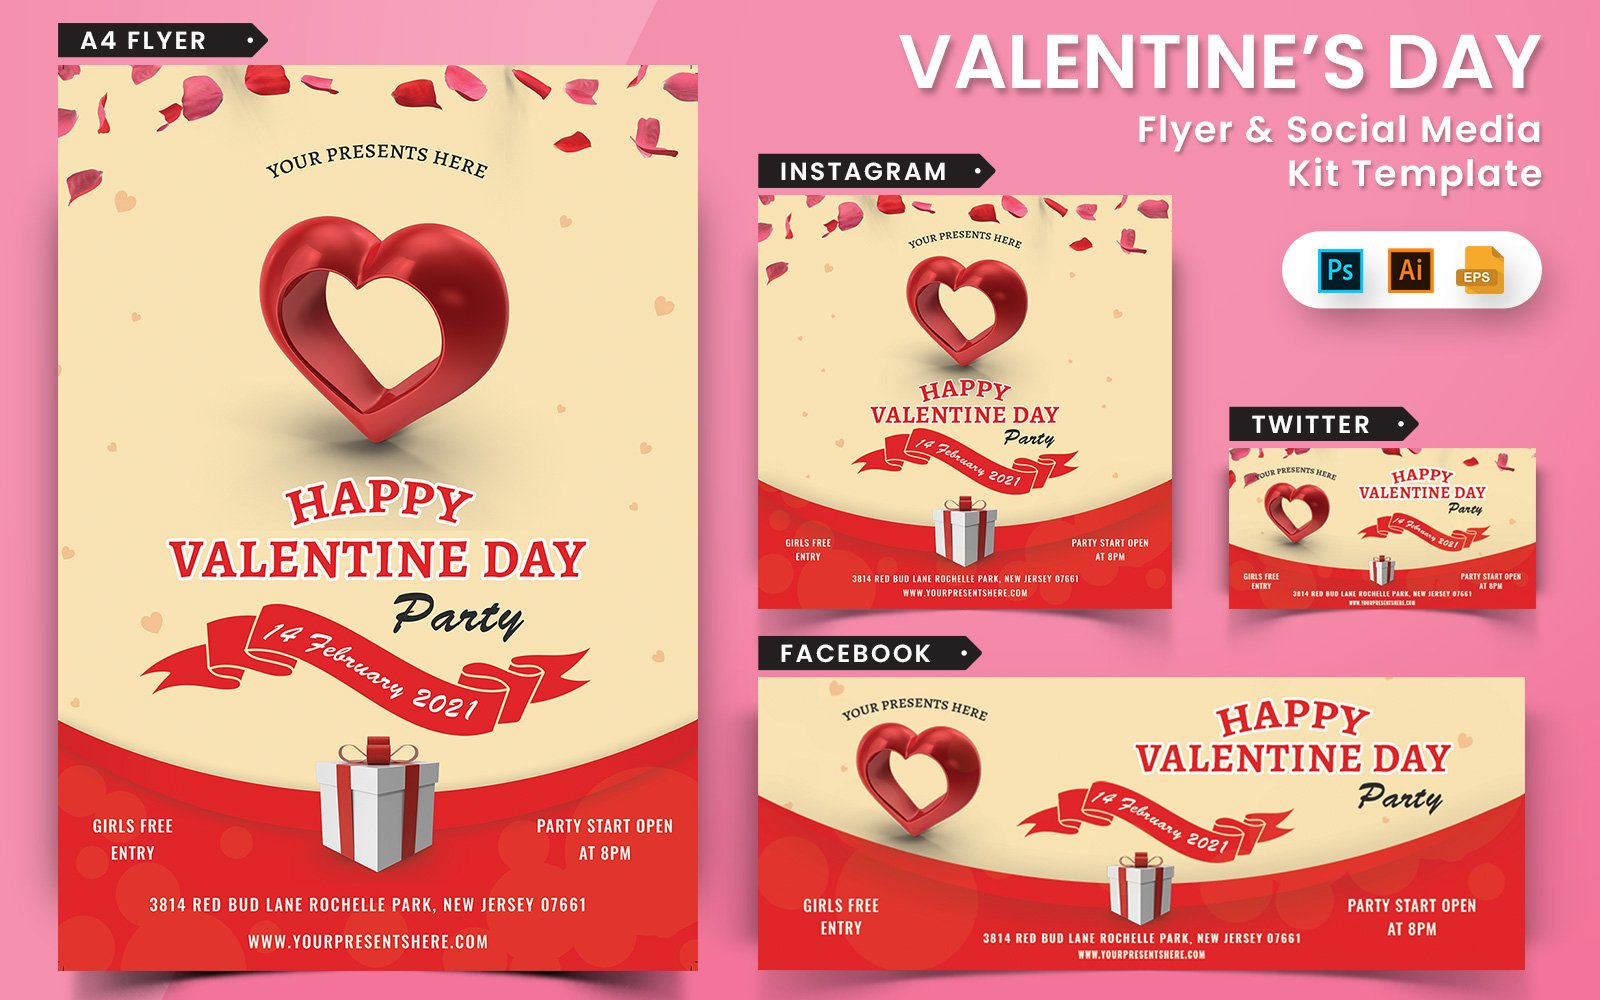 Valentines Day Party Flyer and Social Media Pack